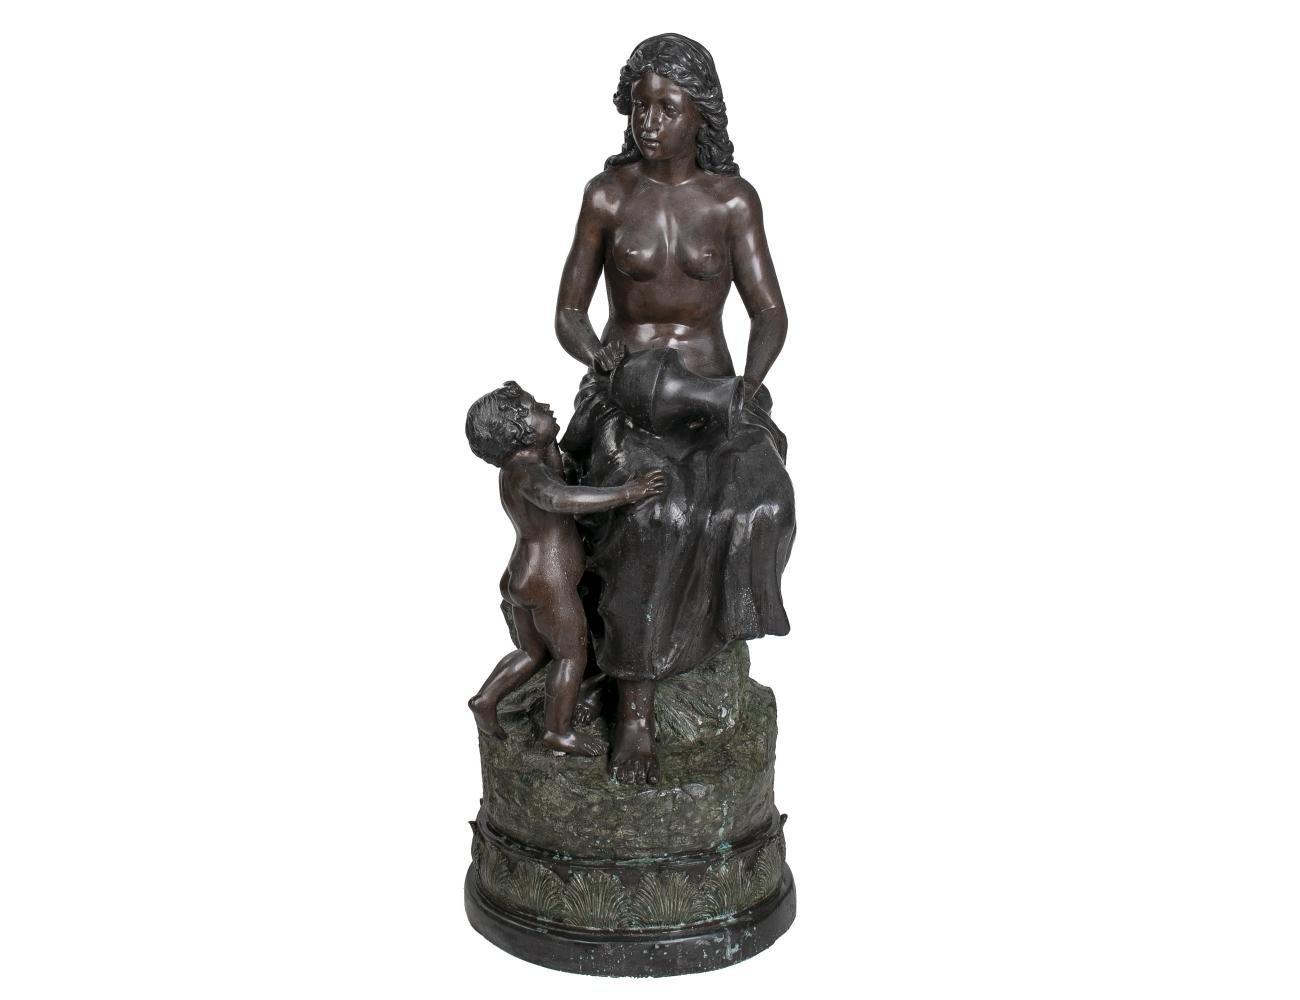 1990s Spanish cast bronze woman with boy and holding a vase figure sculpture.